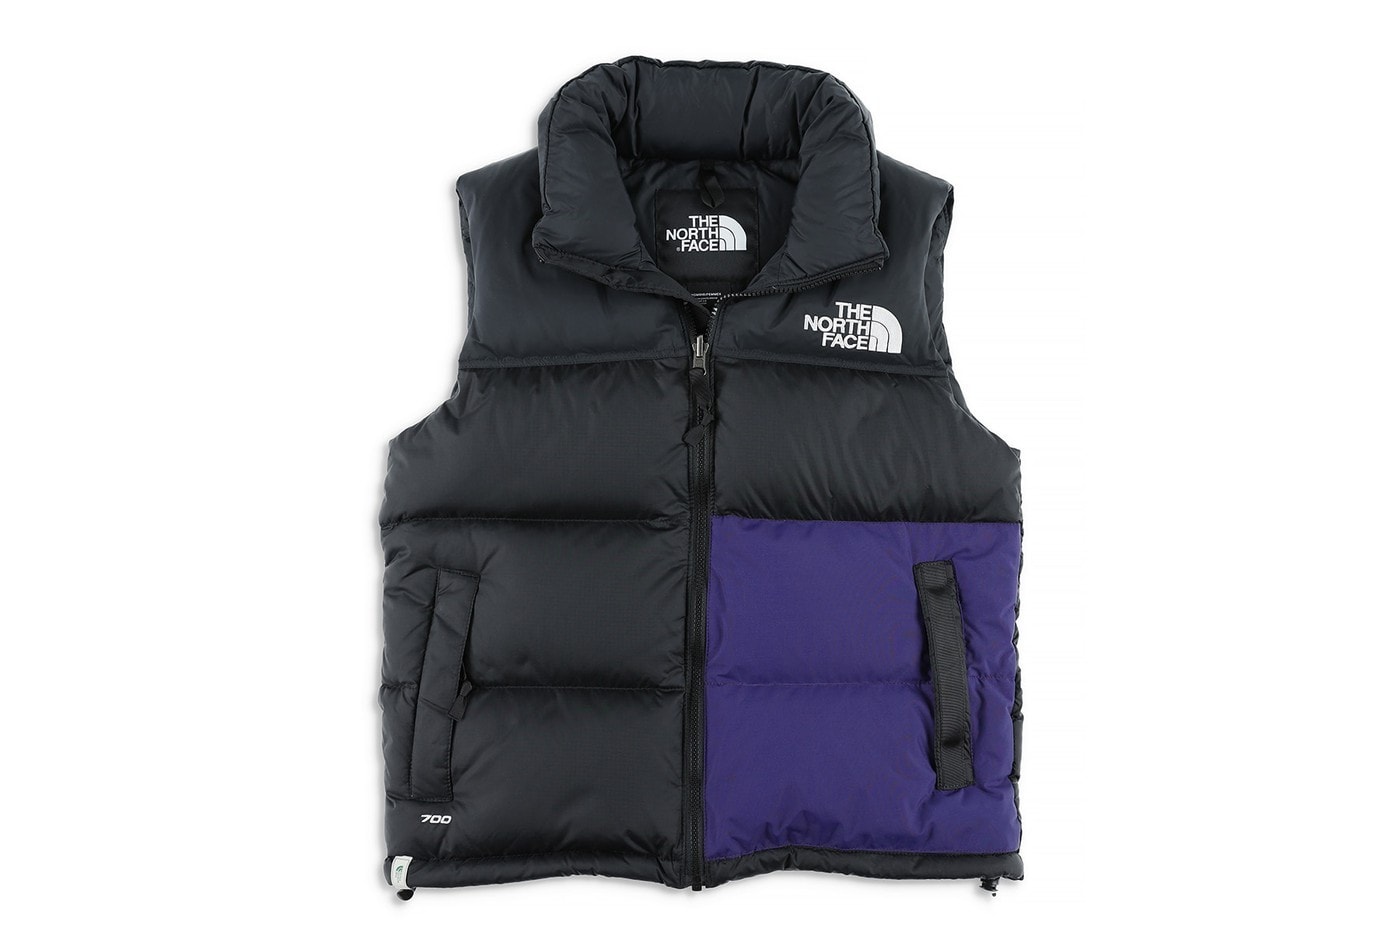 The North Face 旧品再制系列「Remade Collection」释出多款羽绒外套